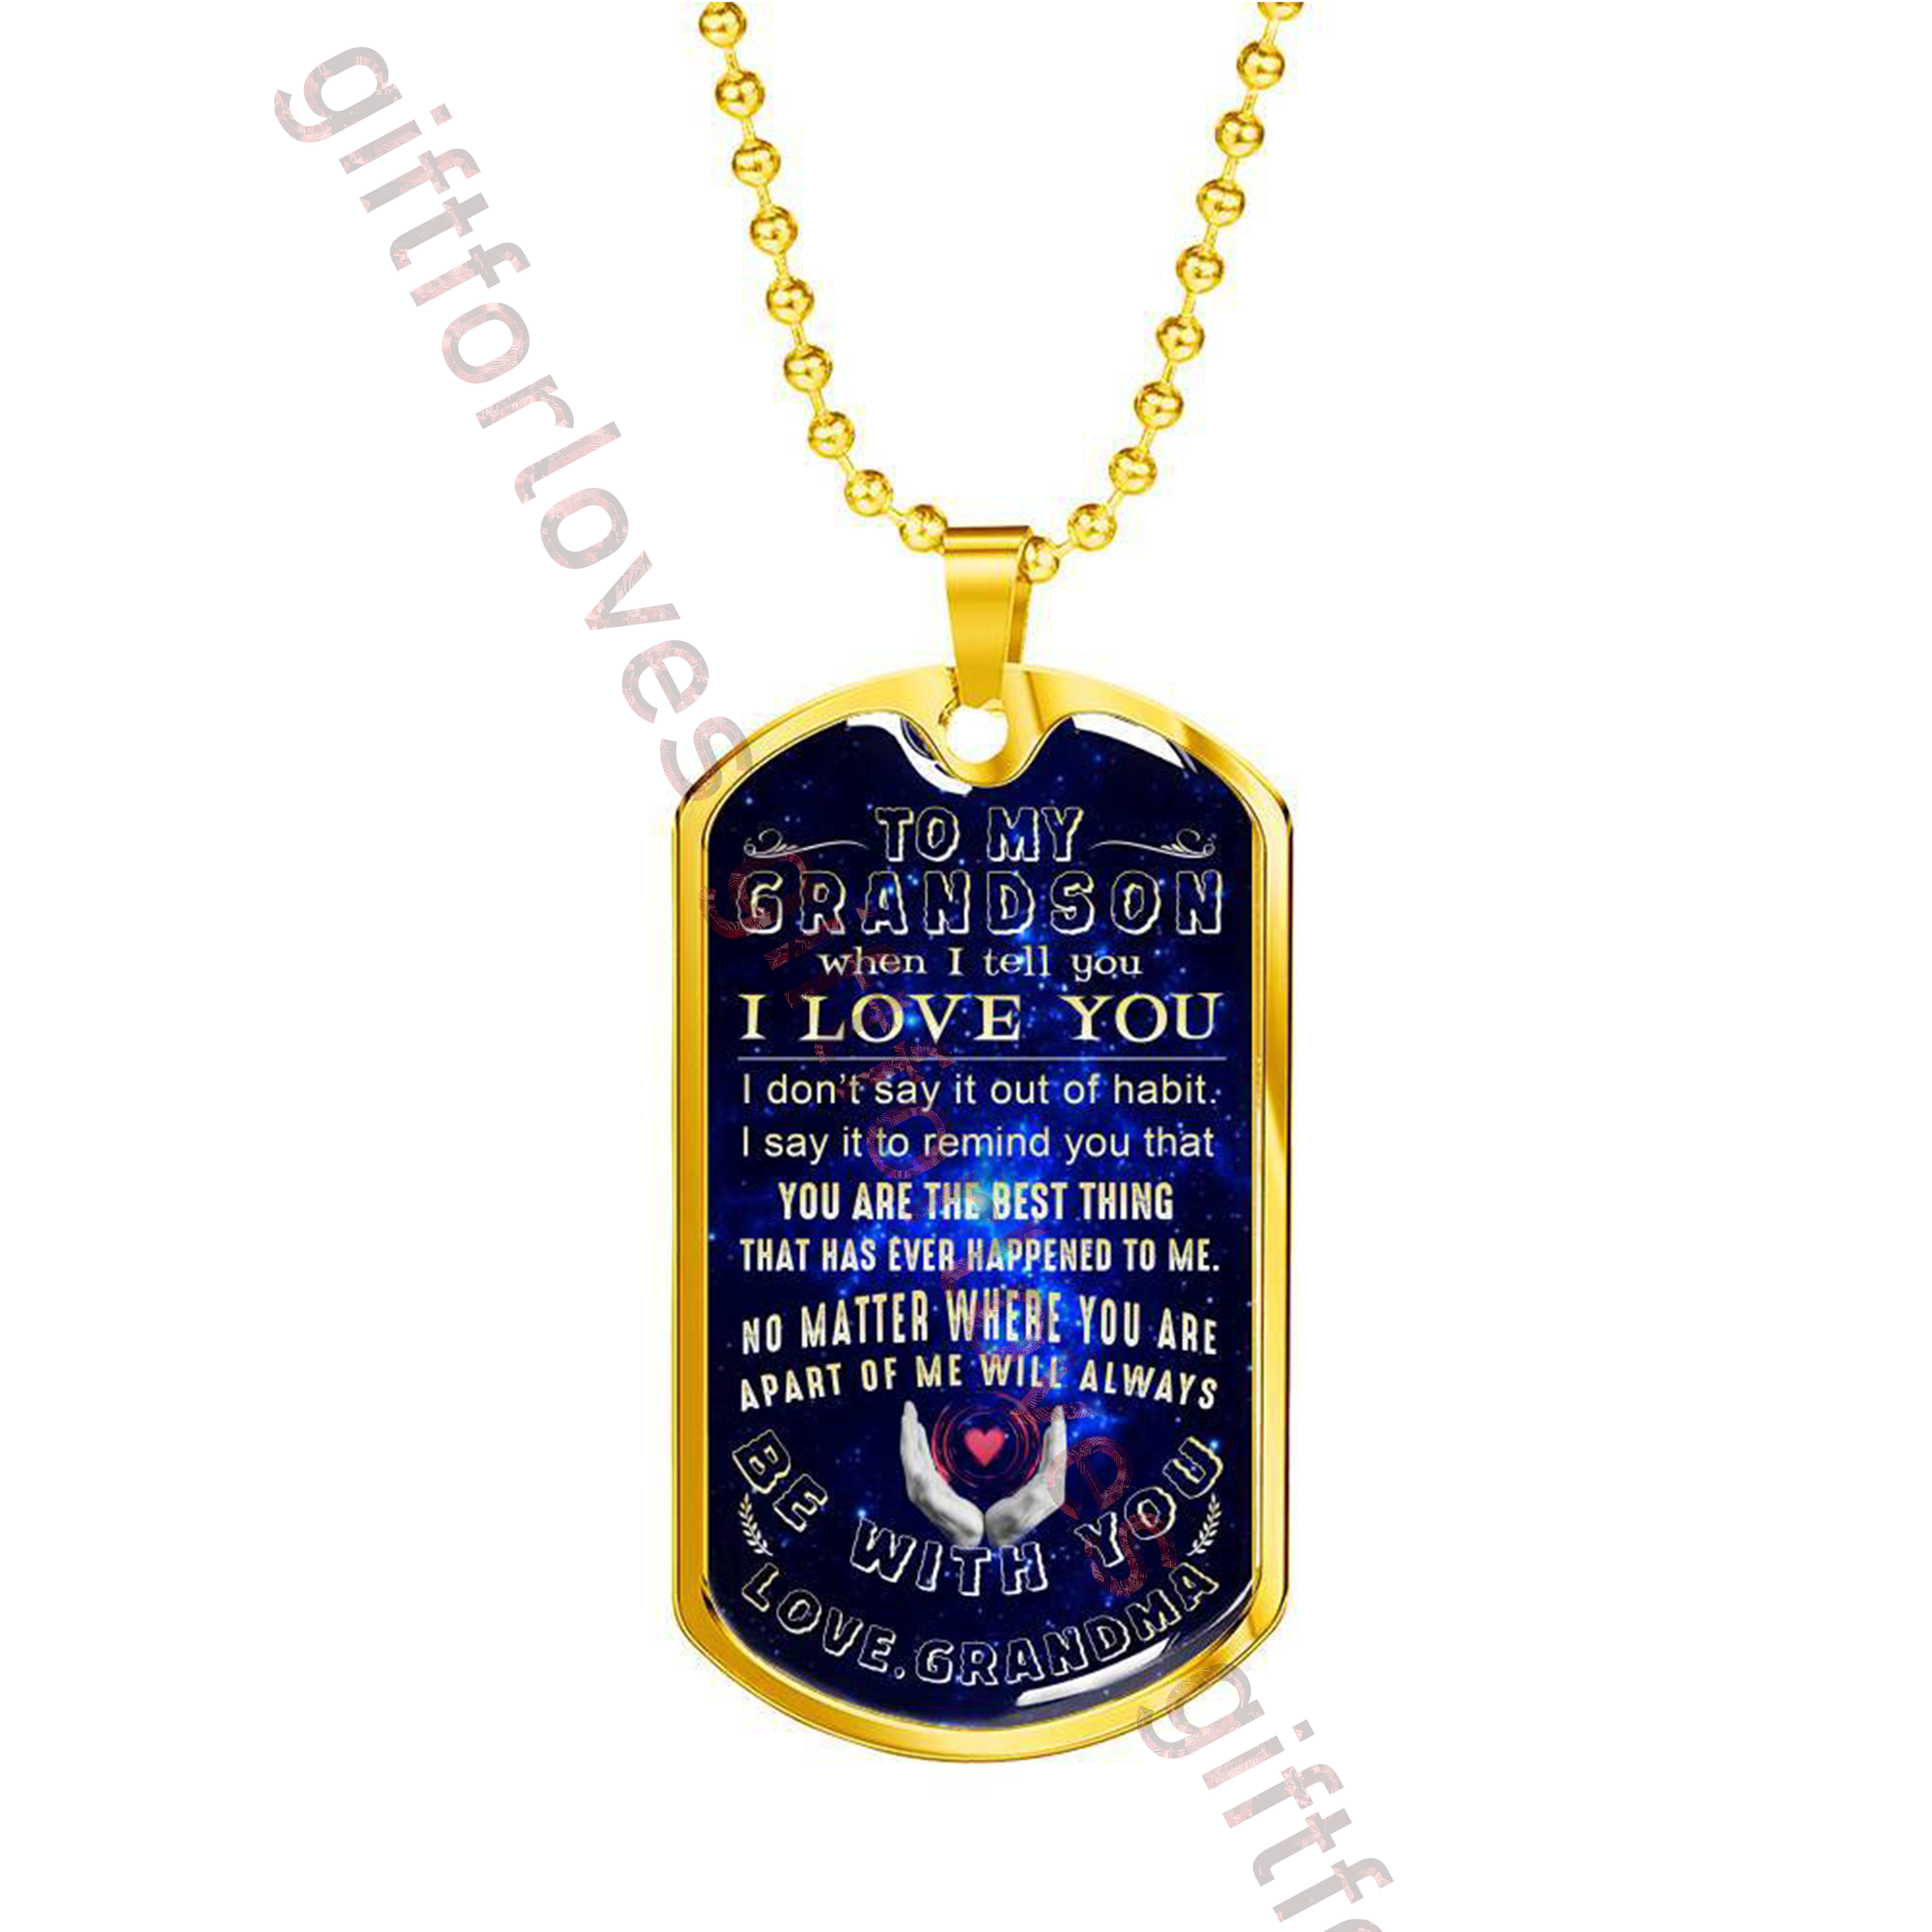 GRANDSON DOG TAG, TO MY GRANDSON: BEST GIFT FOR GRANDSON - ALWAYS BE WITH YOU